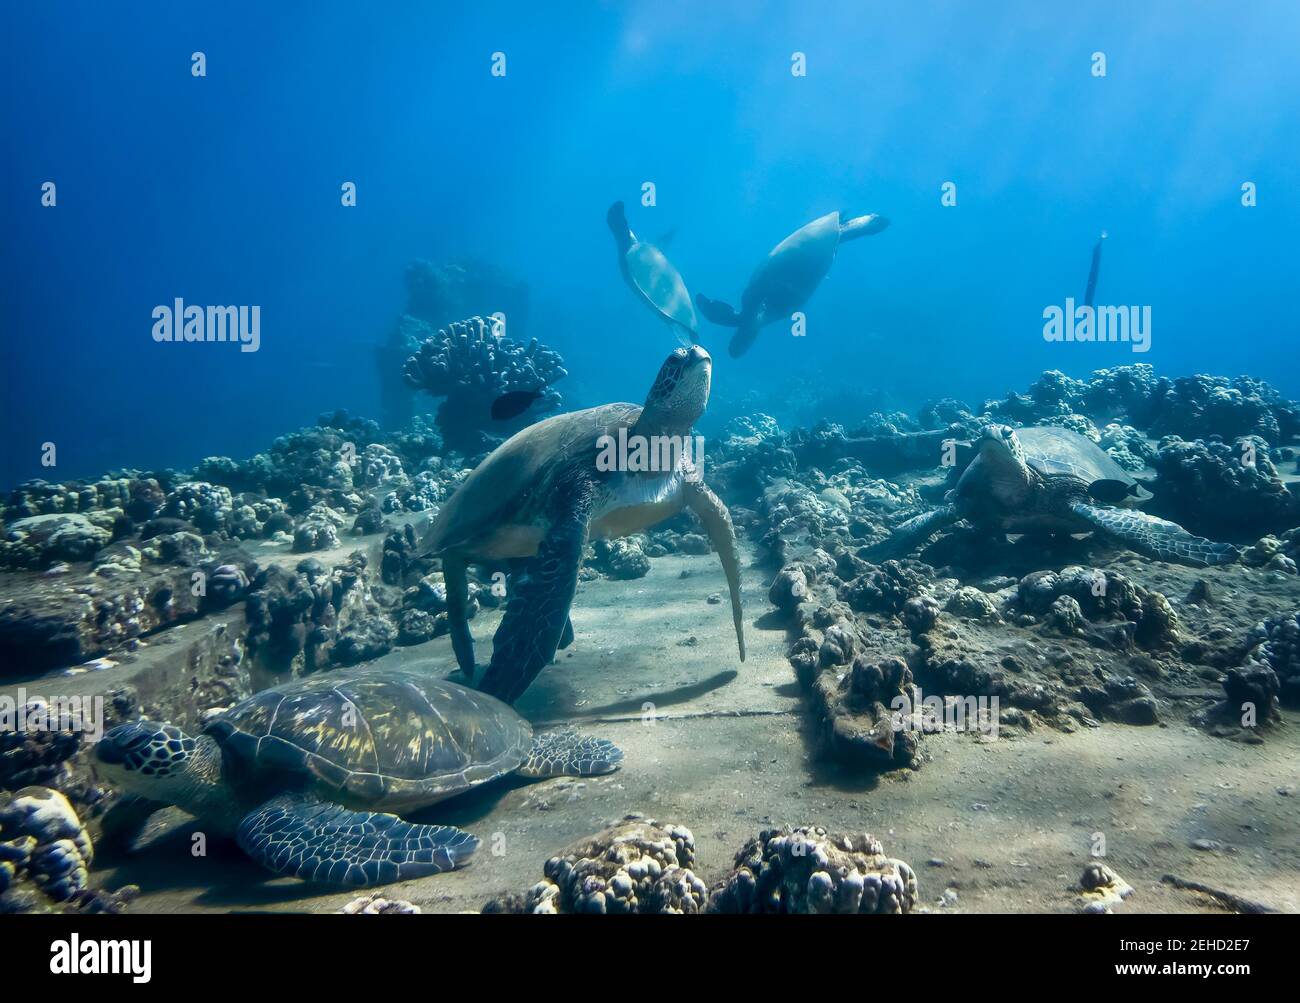 Large group of Hawaiian green sea turtles at cleaning station underwater with fish and corals. Stock Photo